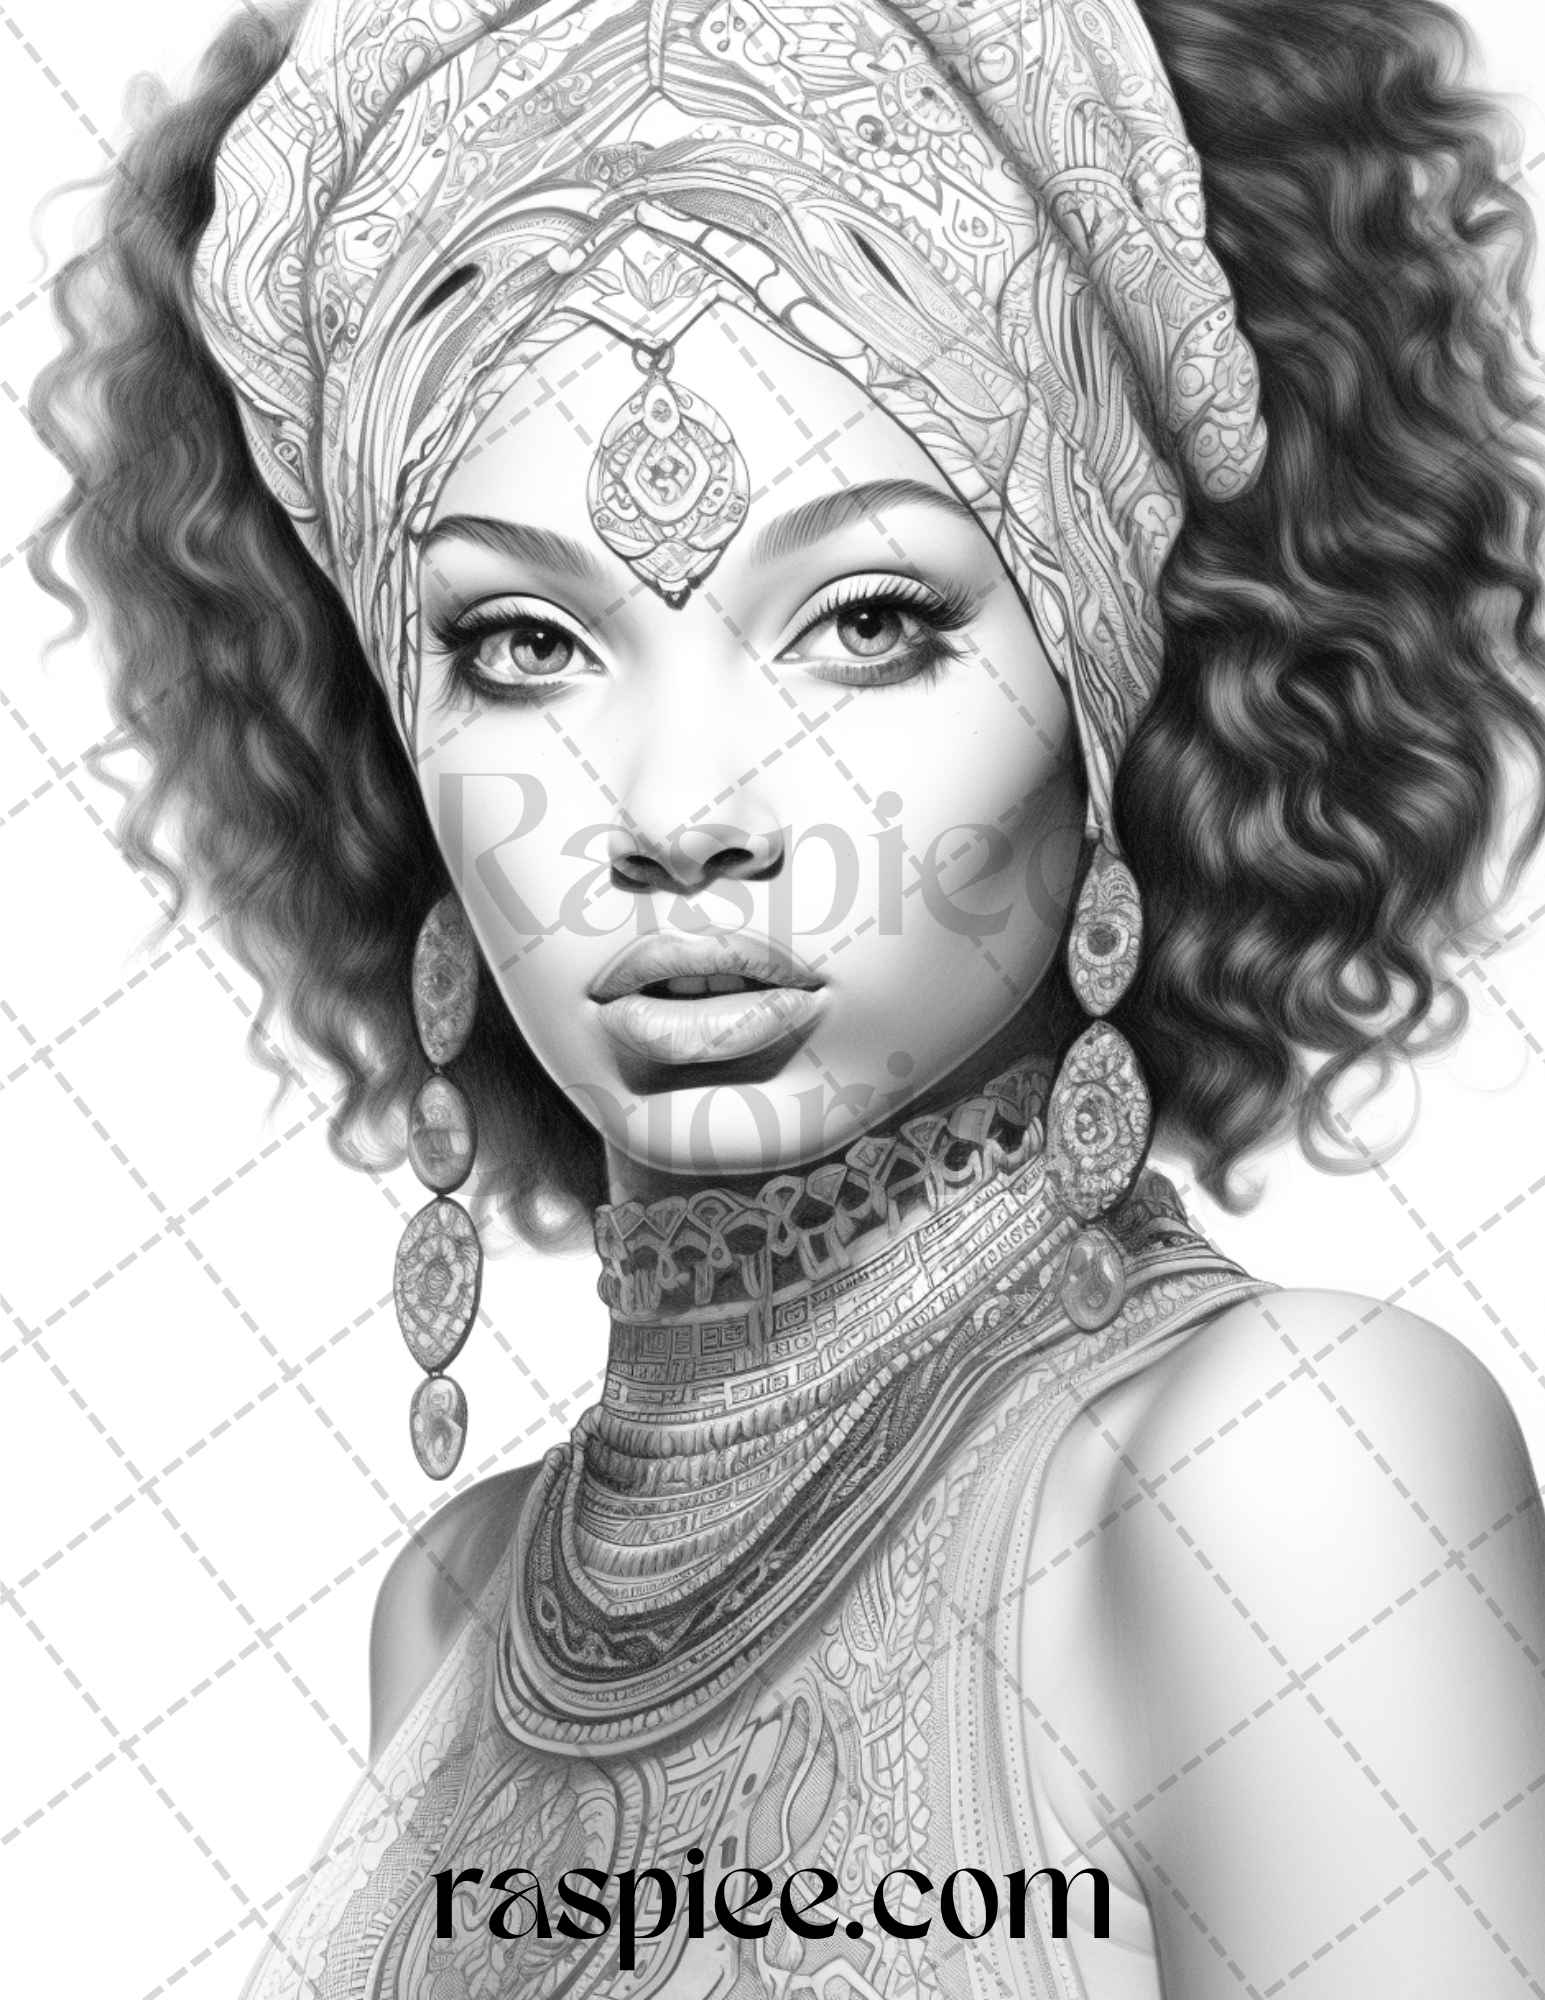 10 Black Woman Coloring Pages, African American Coloring Pages, Adult  Grayscale Coloring Pages Instant Download Series 1 